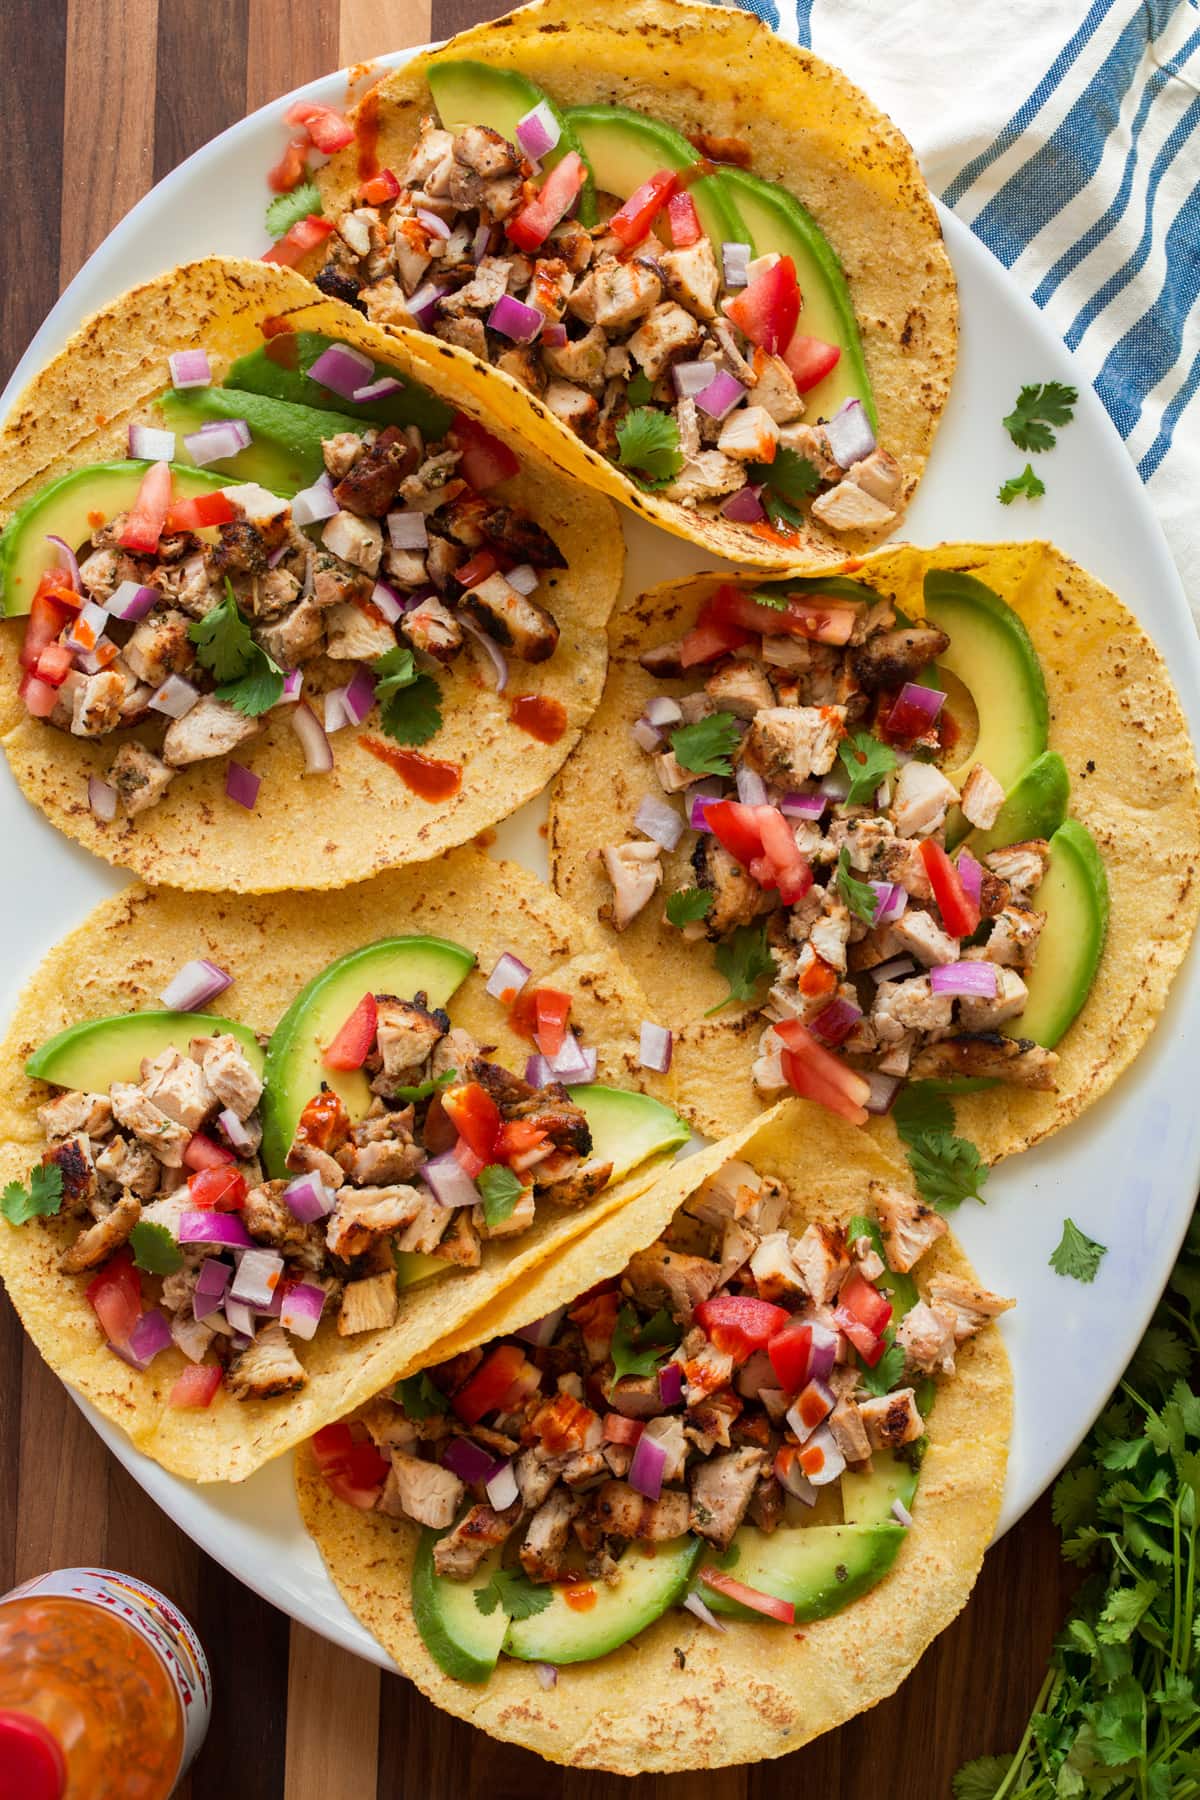 Image of tacos on a platter with homemade tortillas shown. They are topped with diced chicken, avocado, tomato, cilantro and onion.